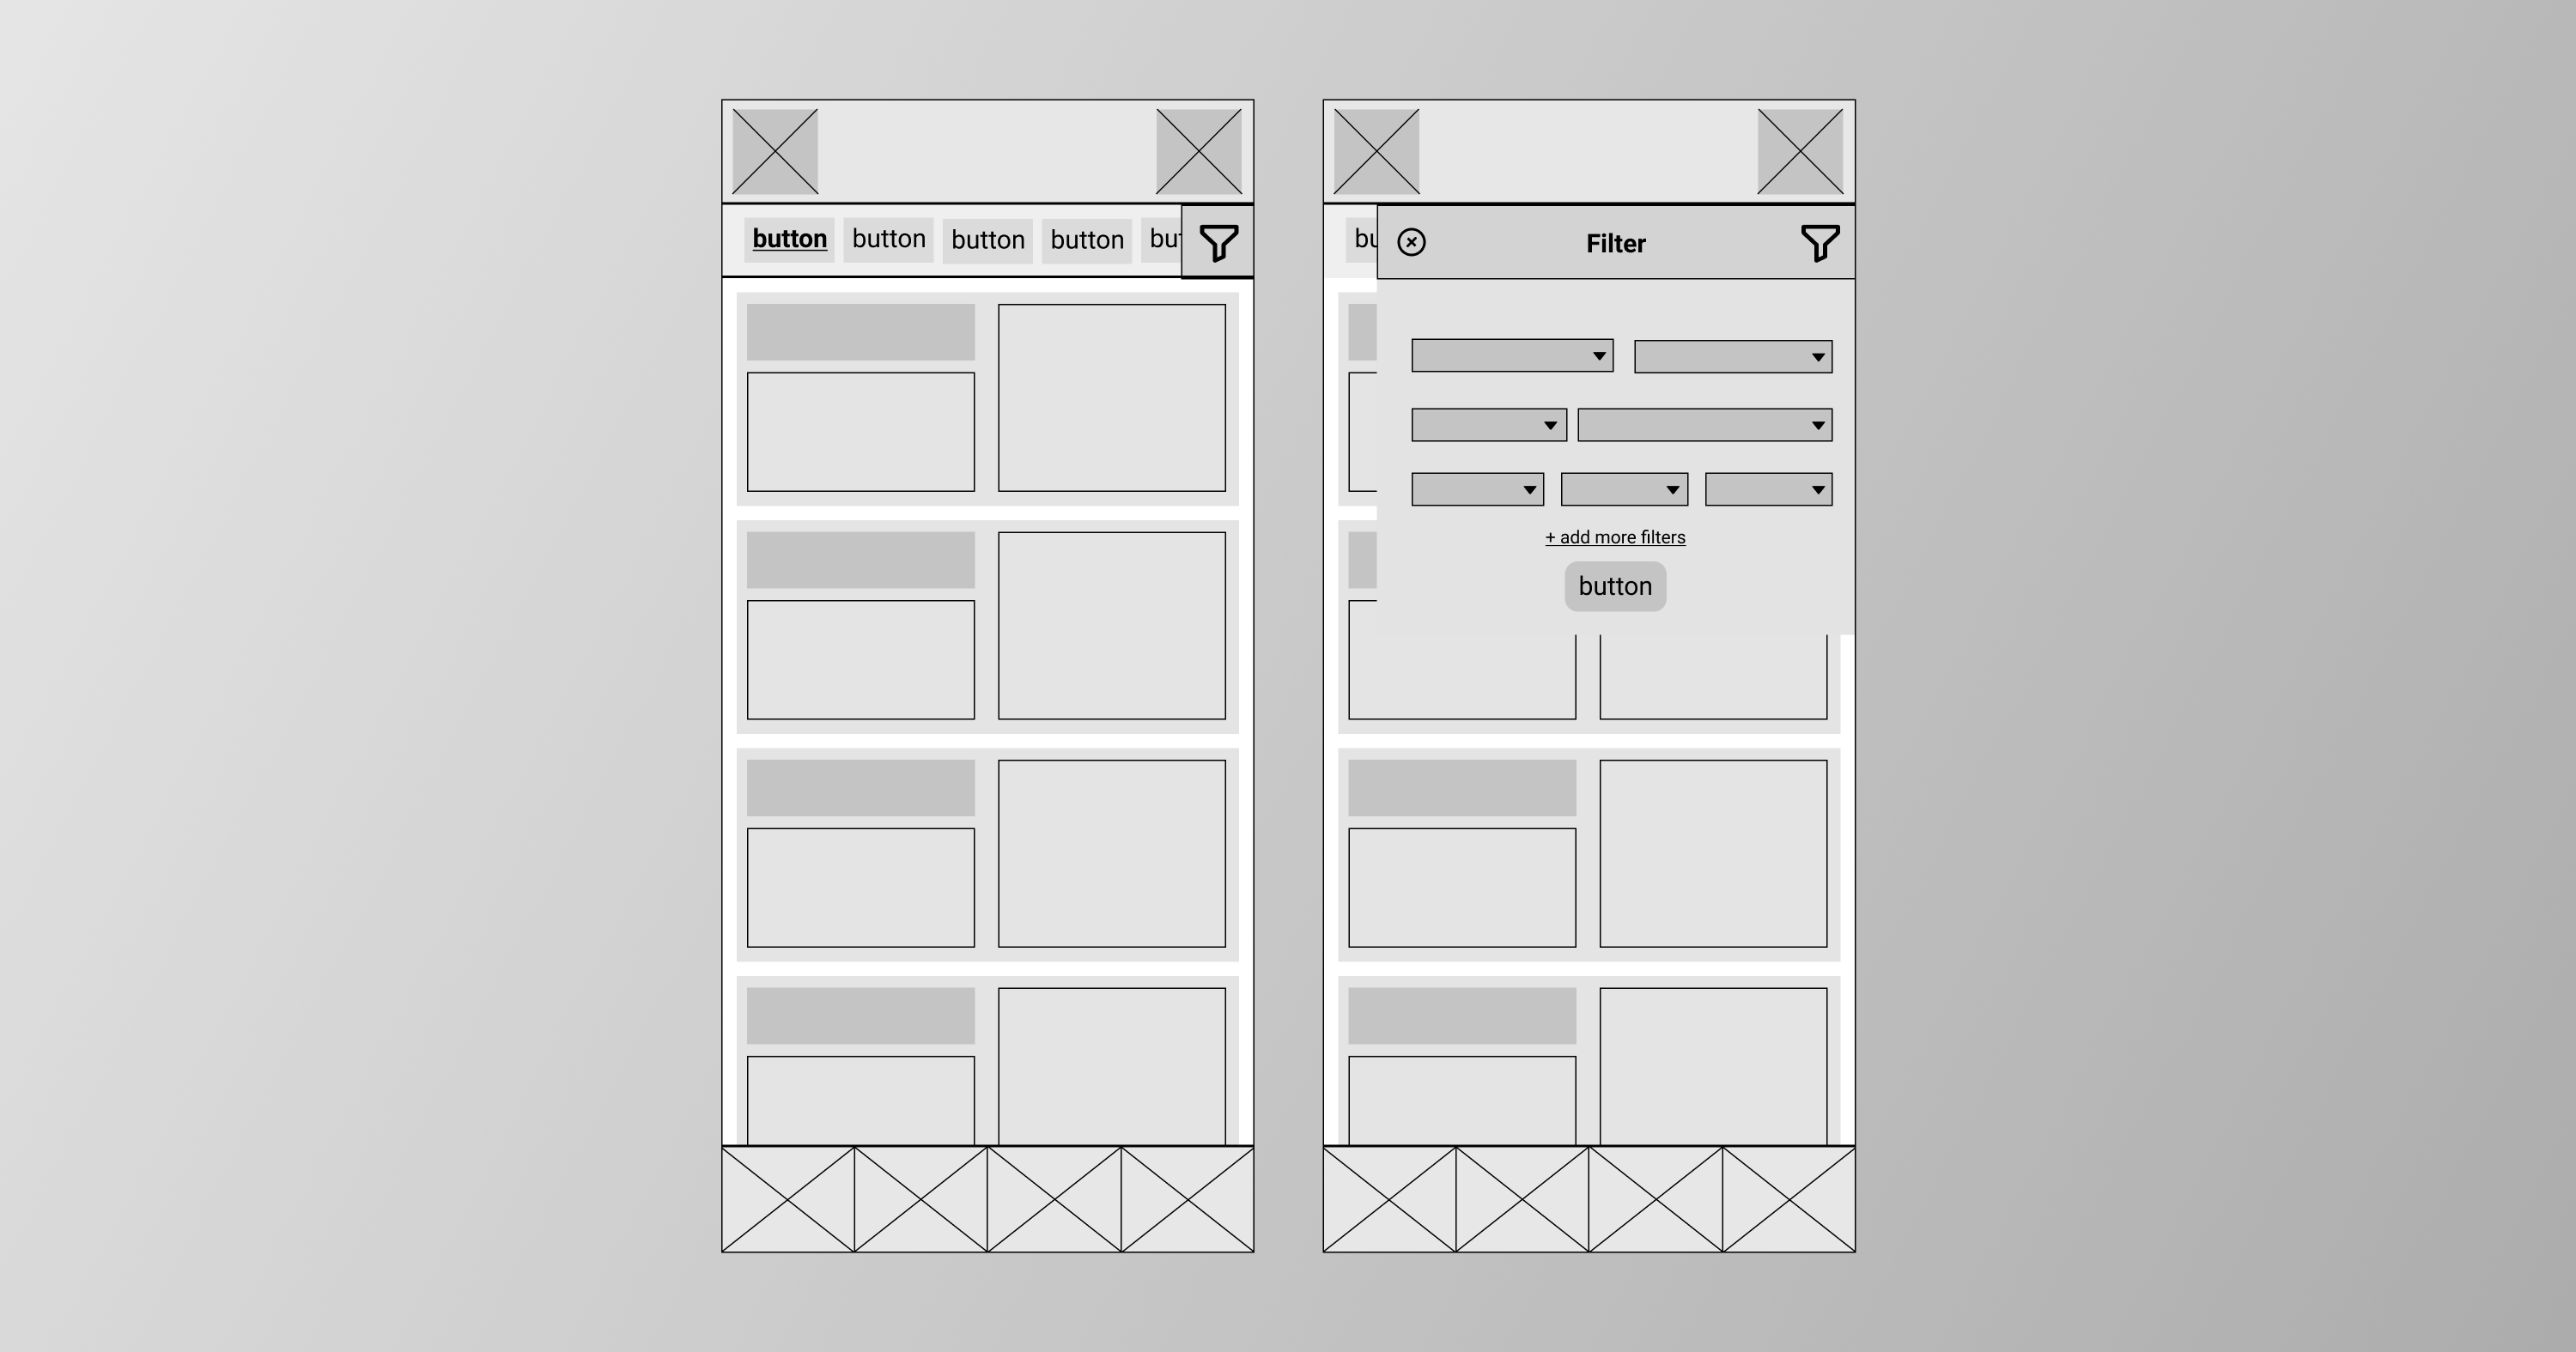 Wireframes for this design challenge